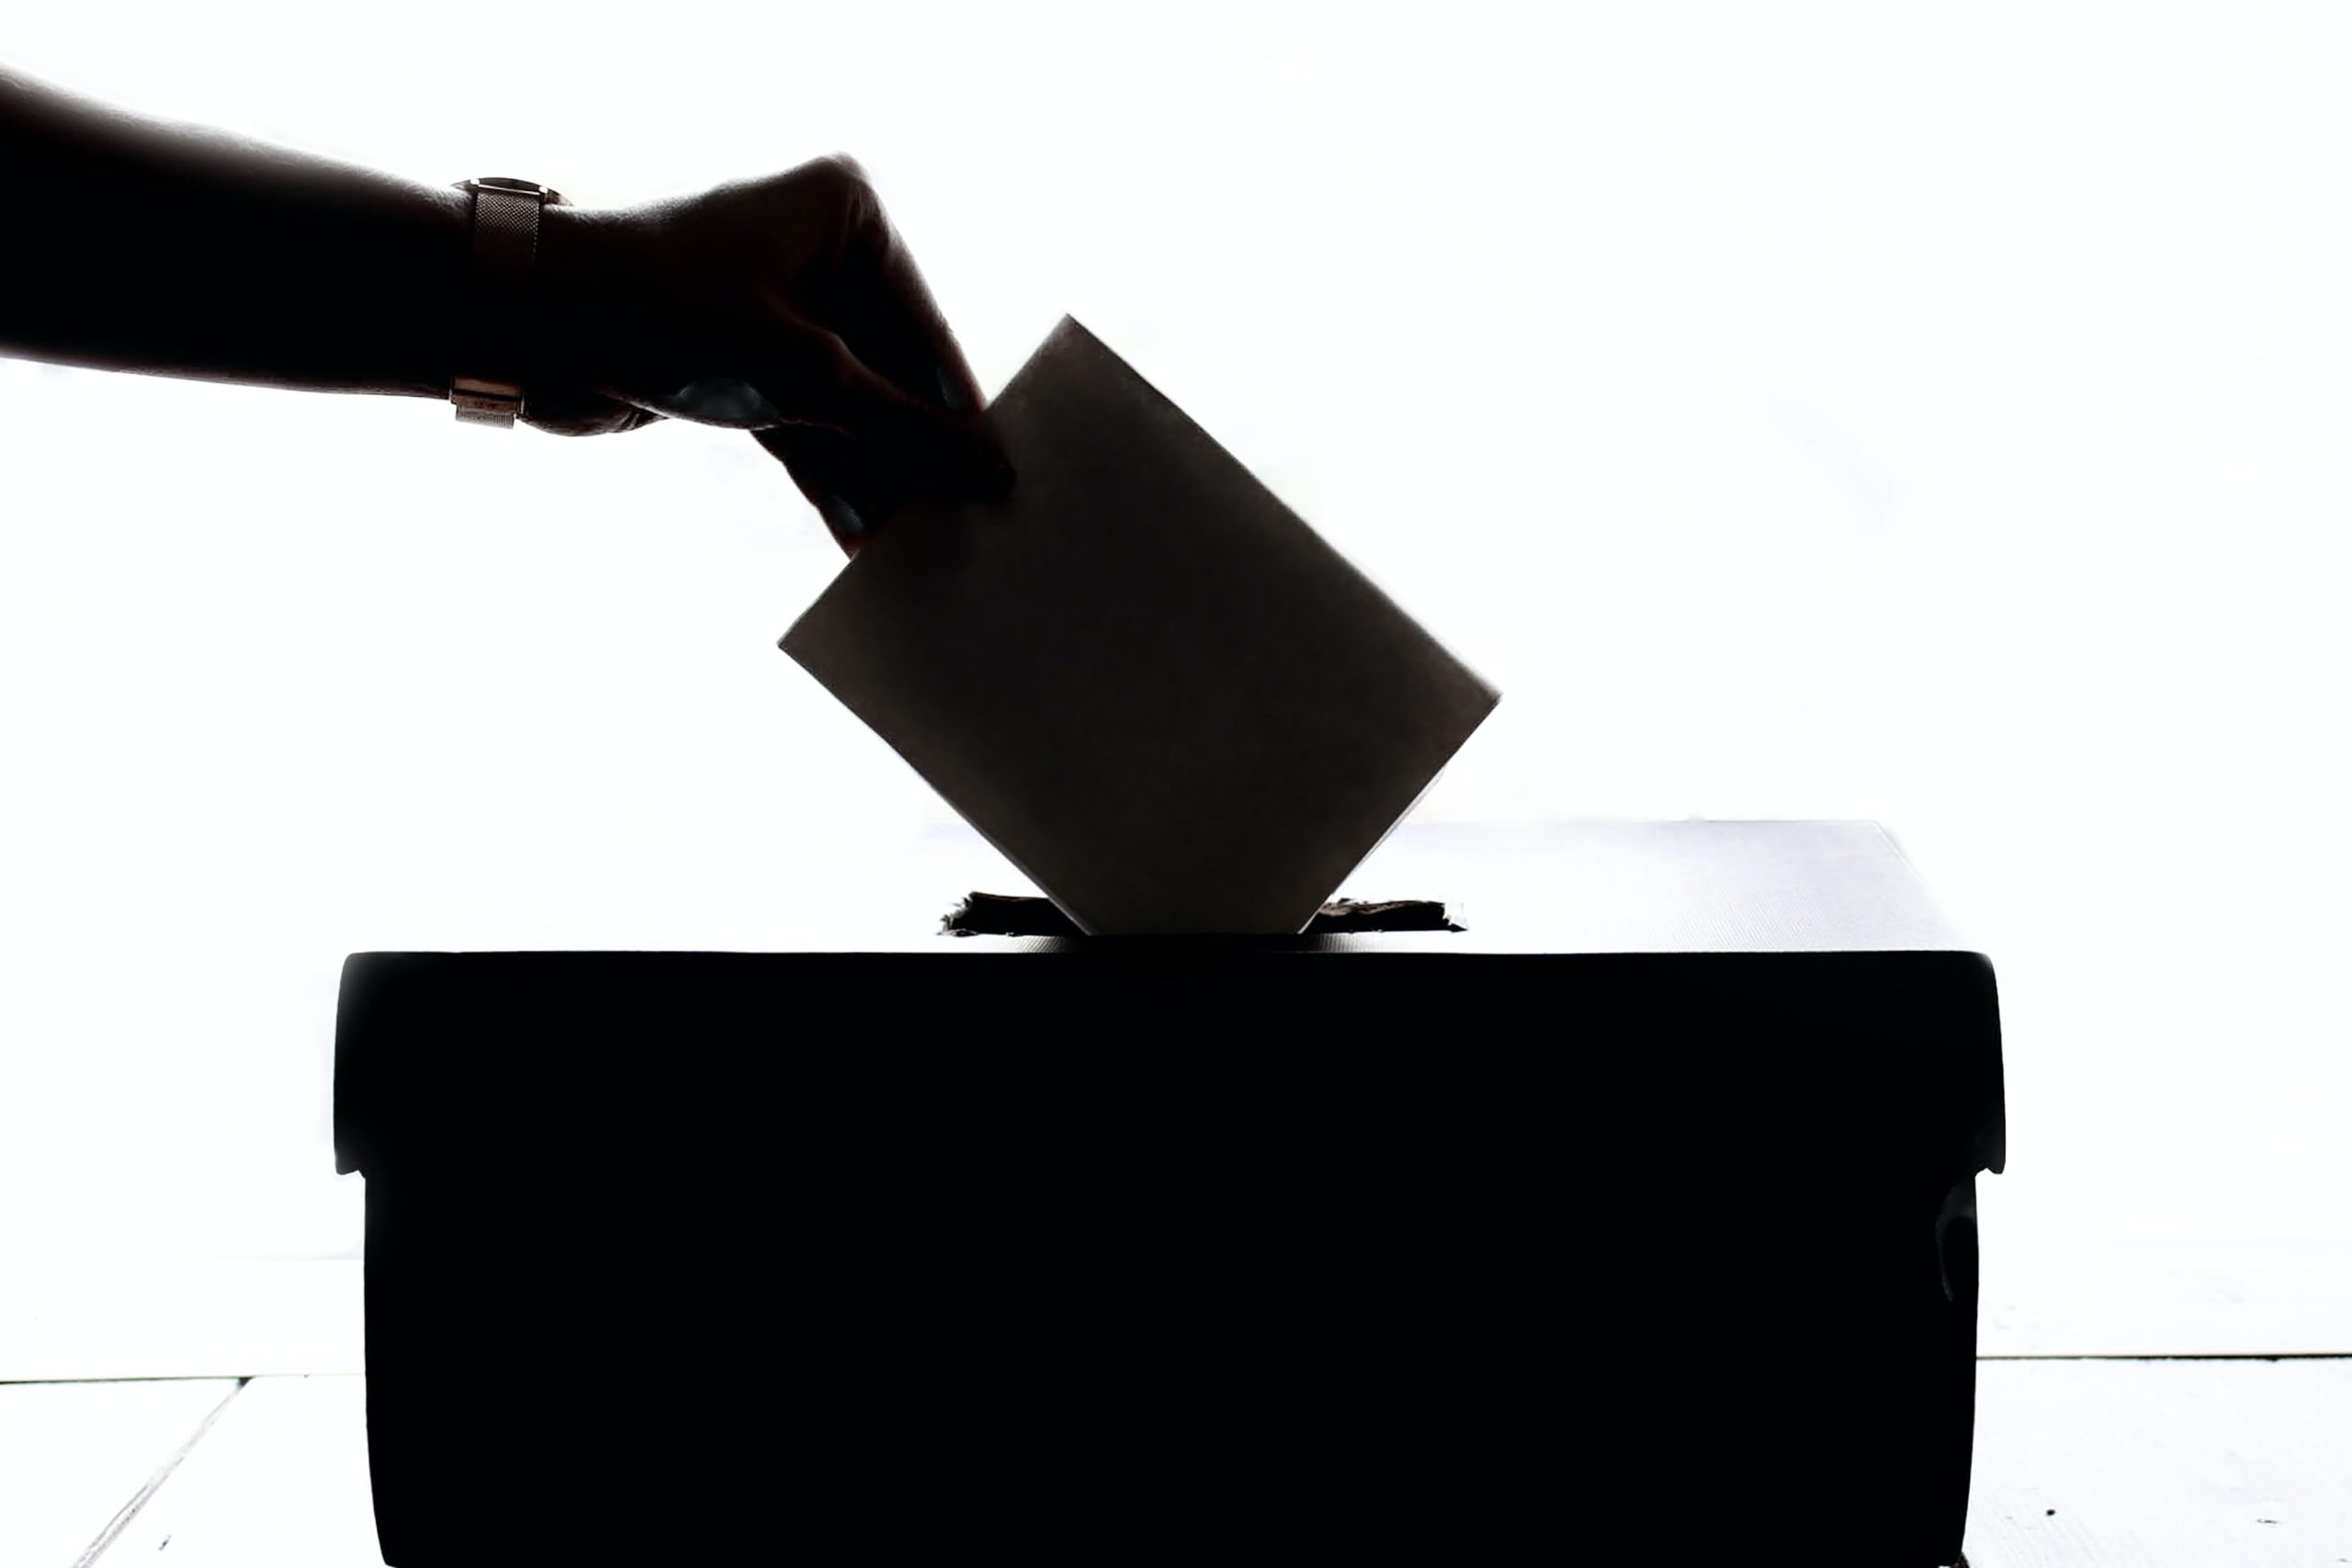 A hand putting a voting card in a ballot box